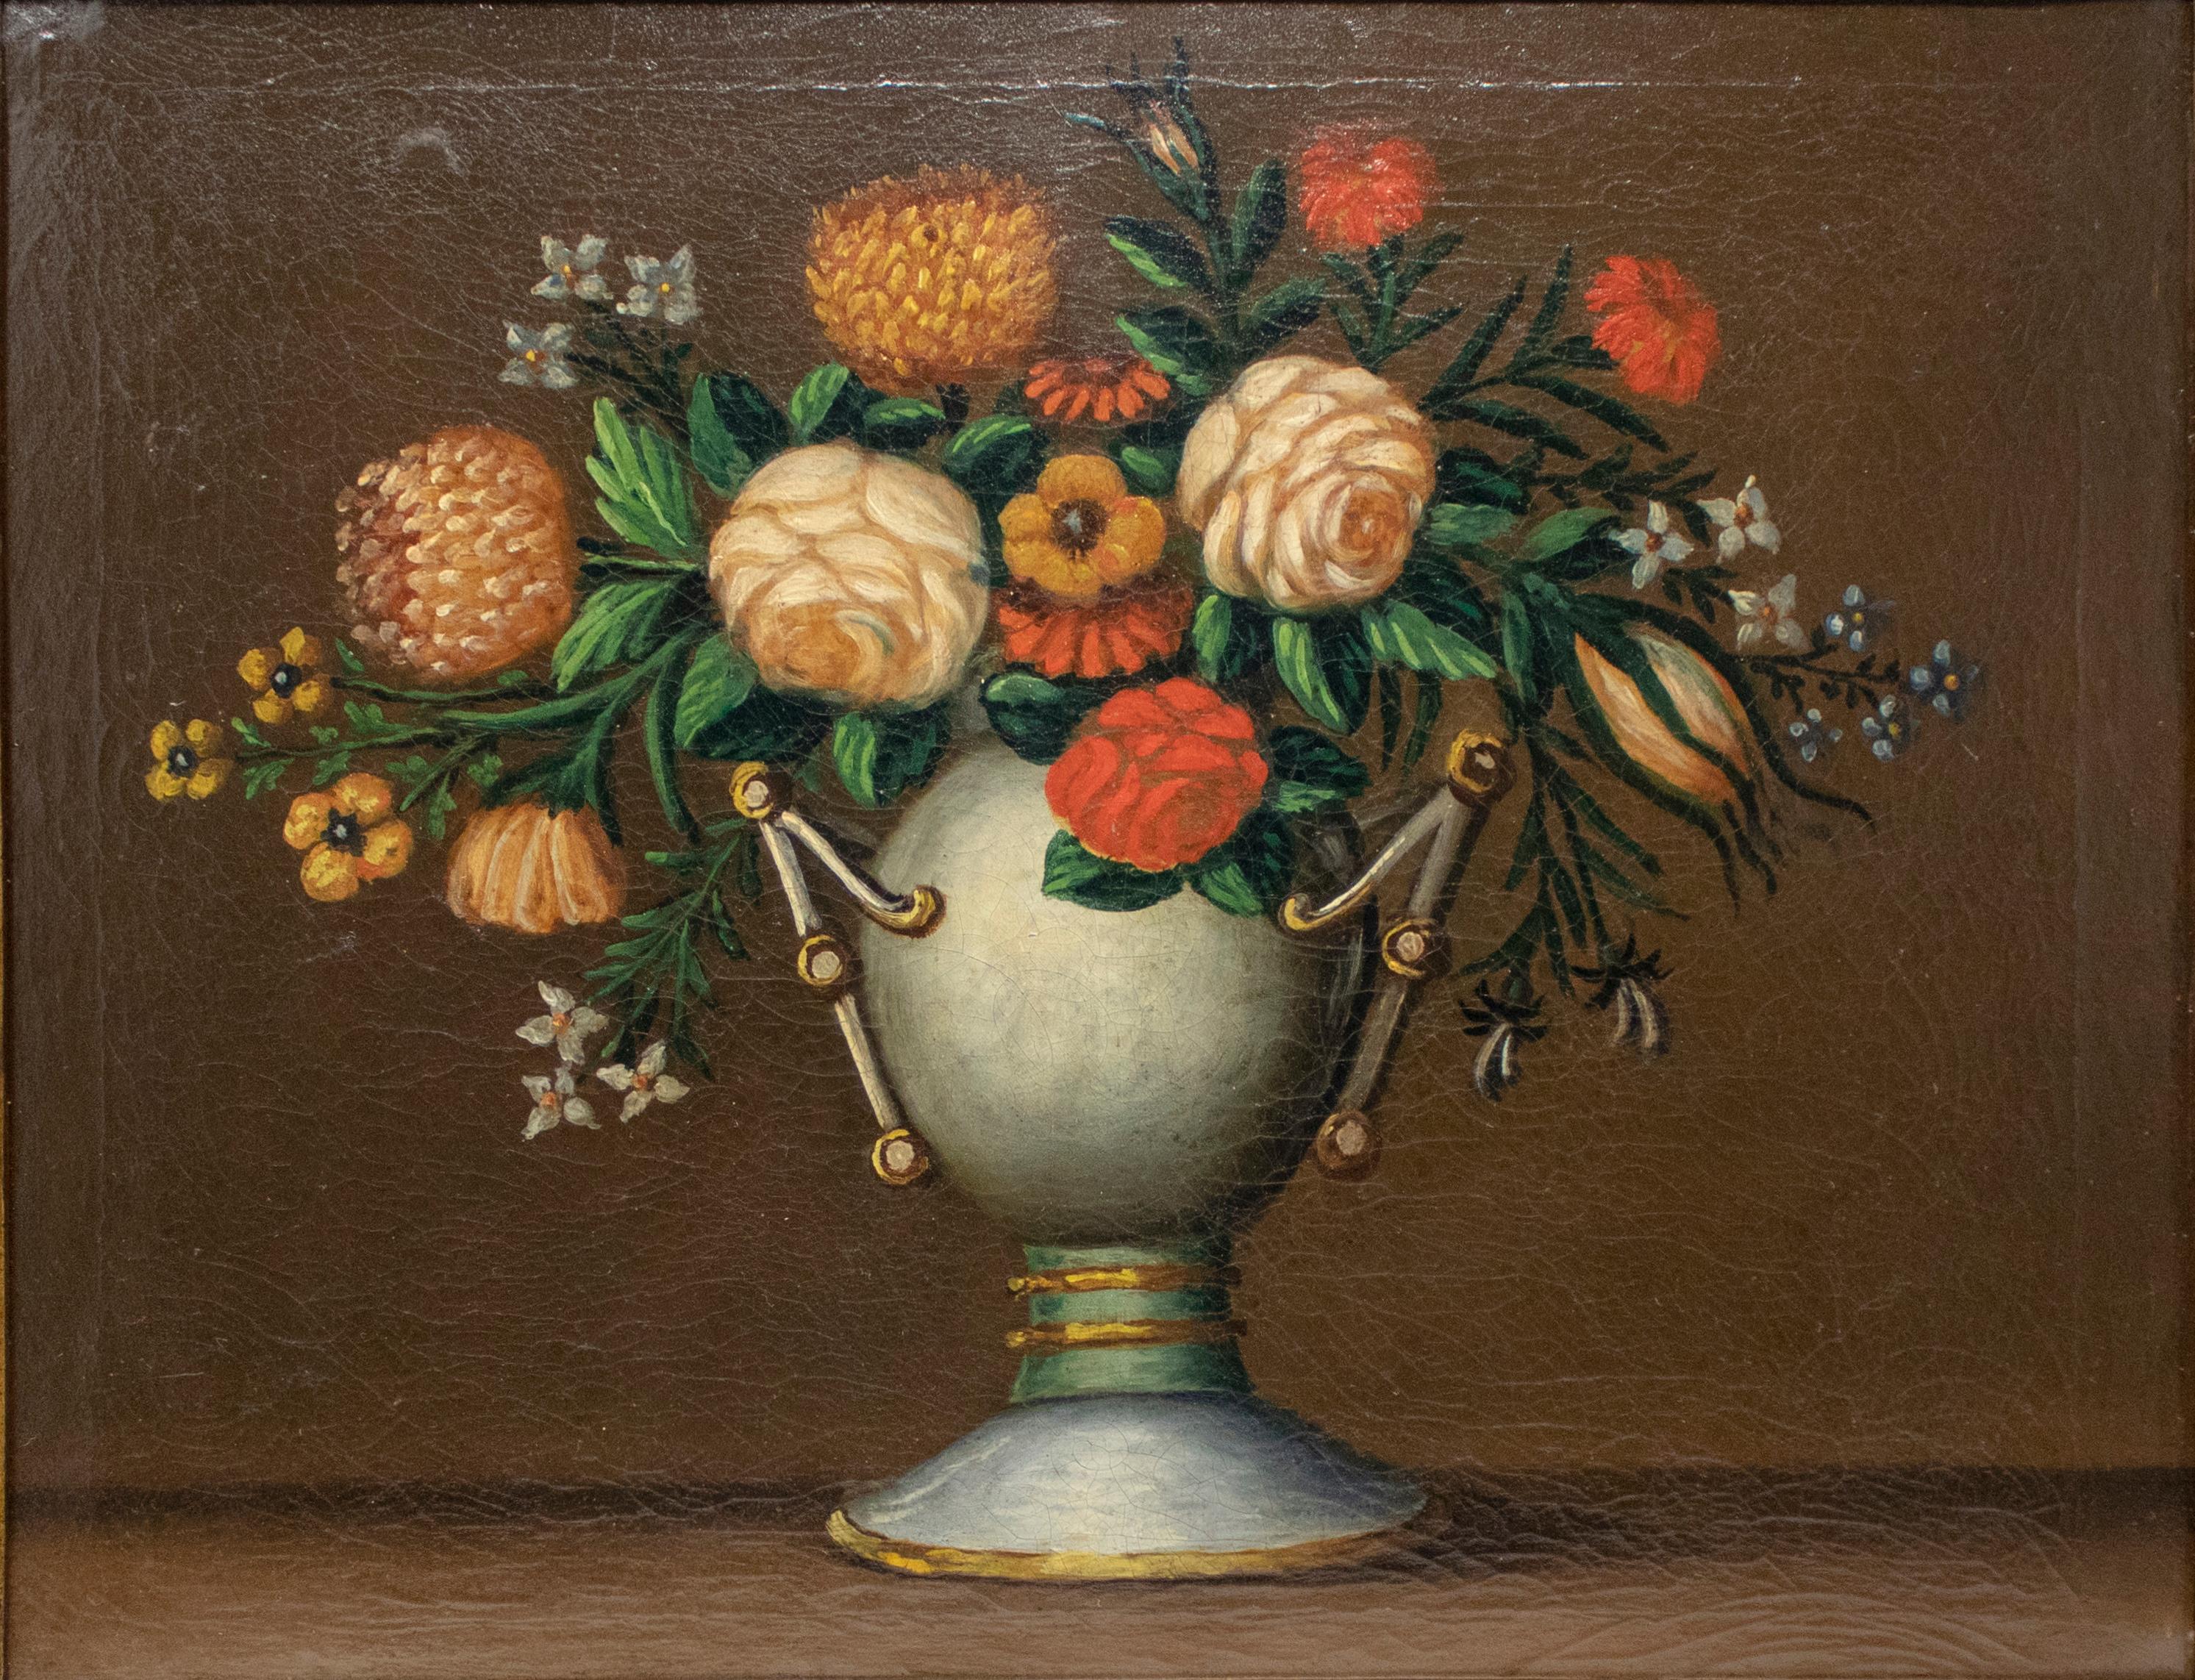 18th century Spanish school still life flowers oil on canvas painting.

Dimensions with frame: 44.5 x 54 x .2.5.